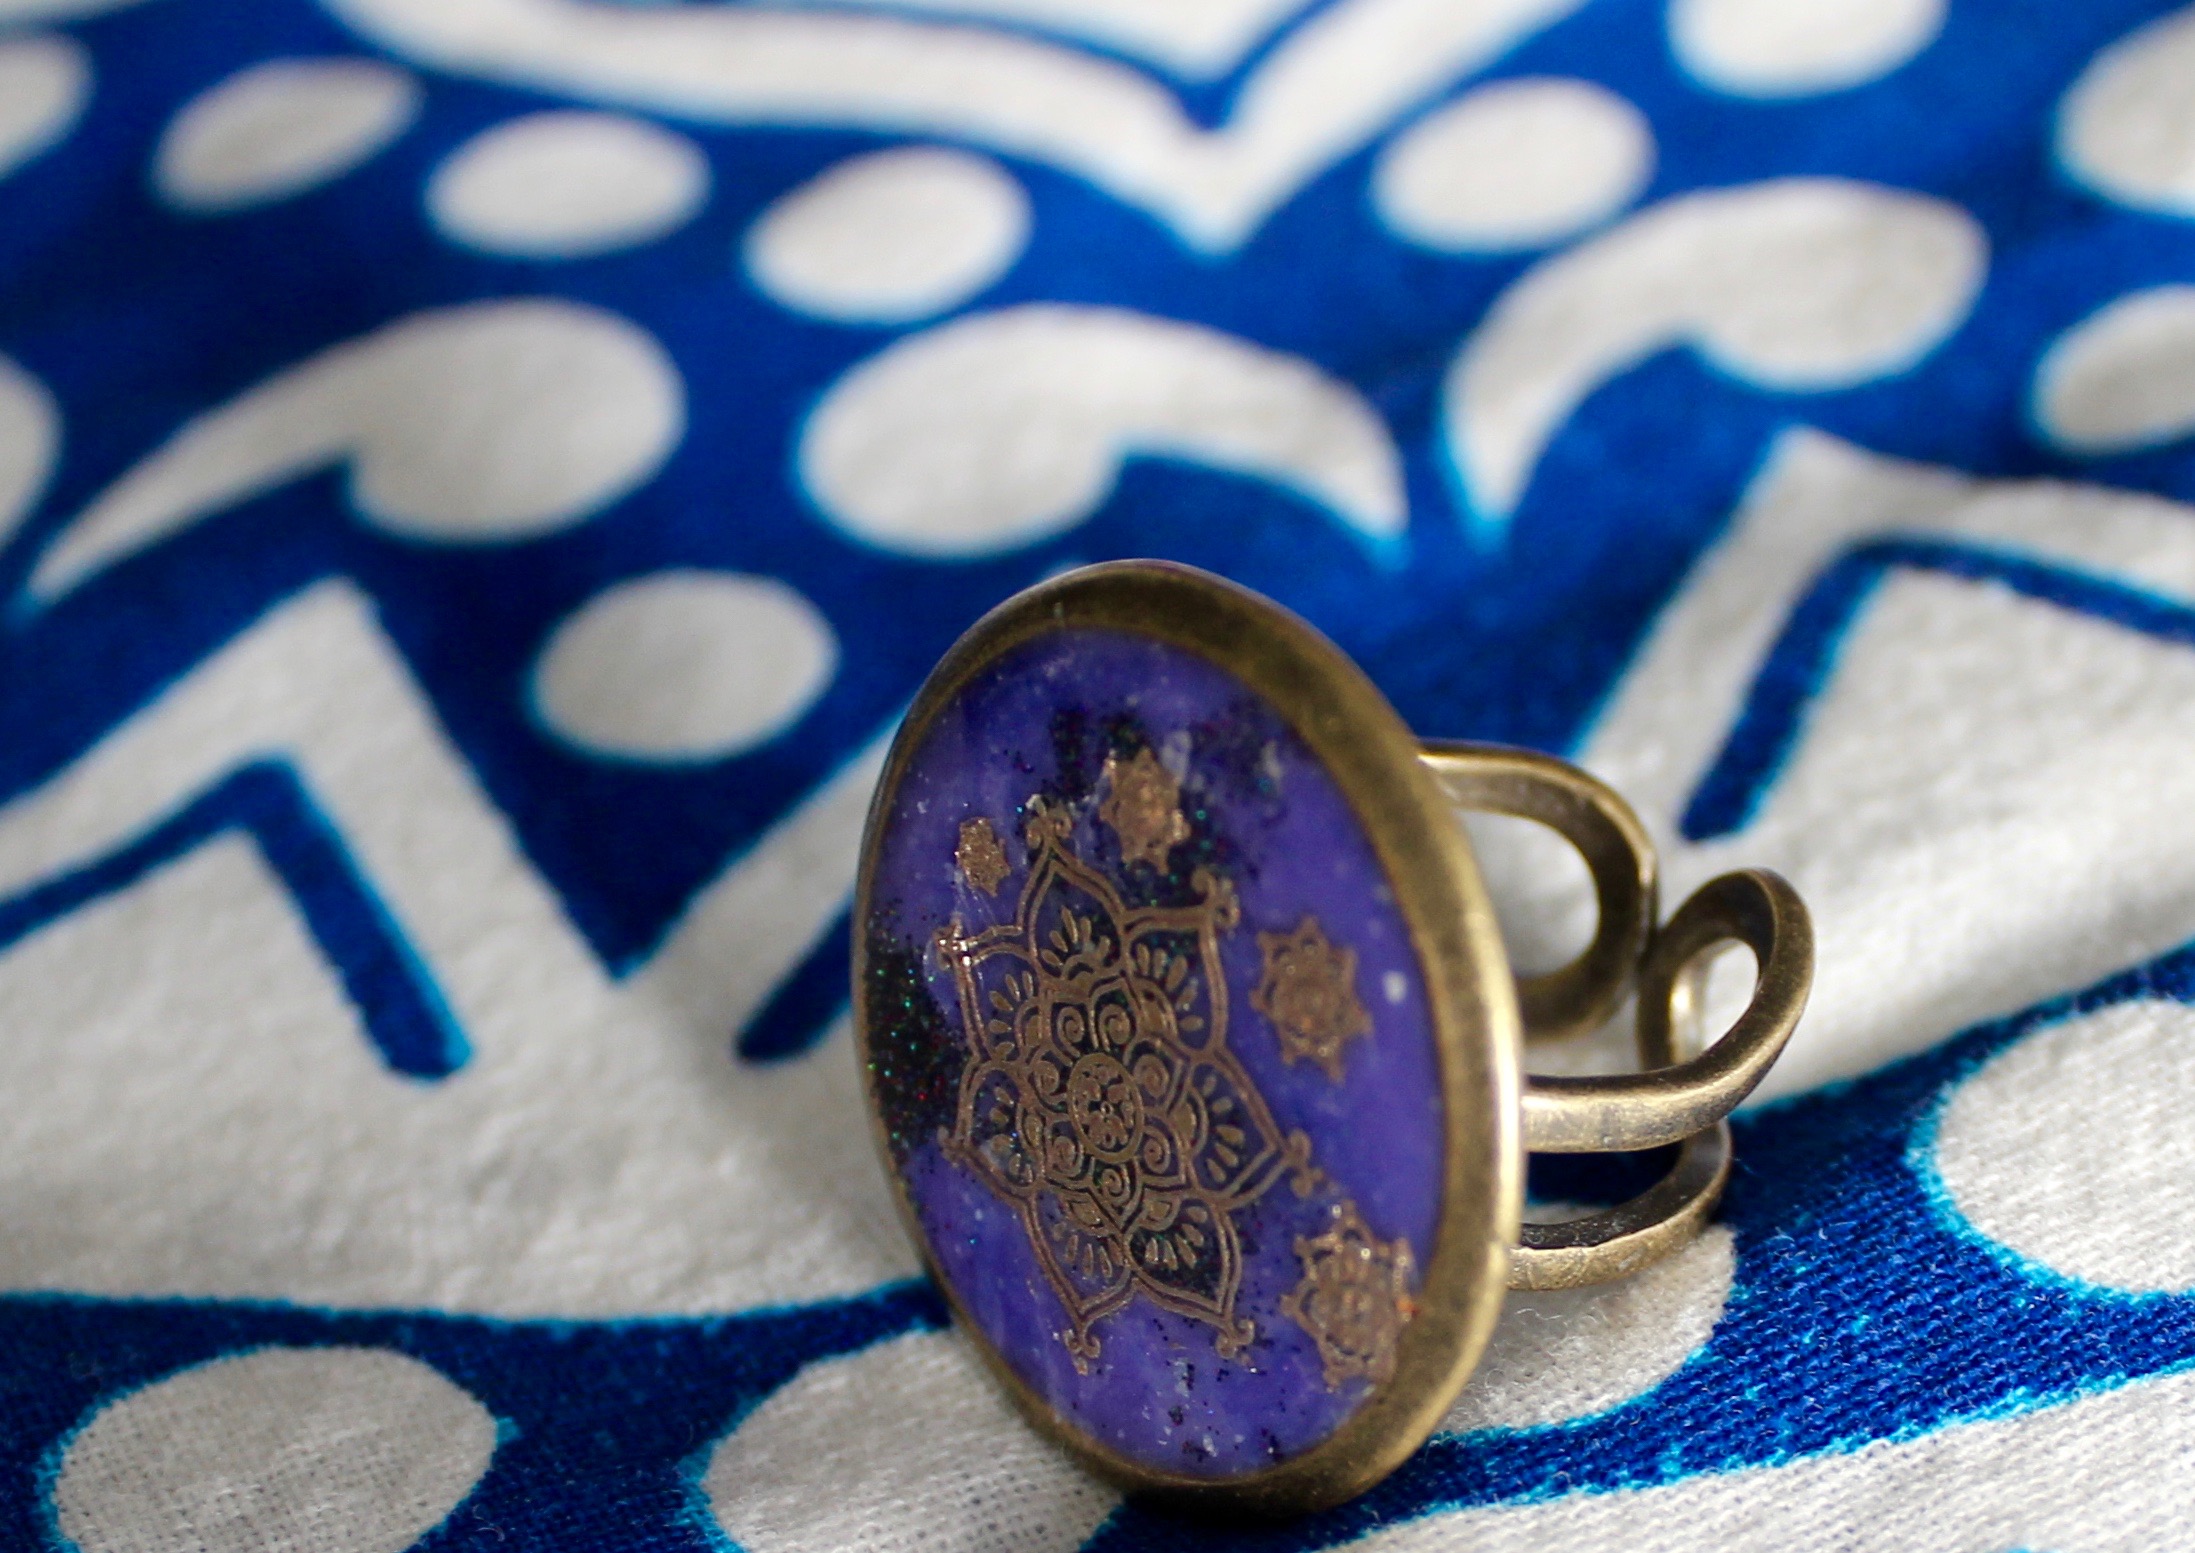 Close-up of ring with gold mandala designs on deep purple resin background